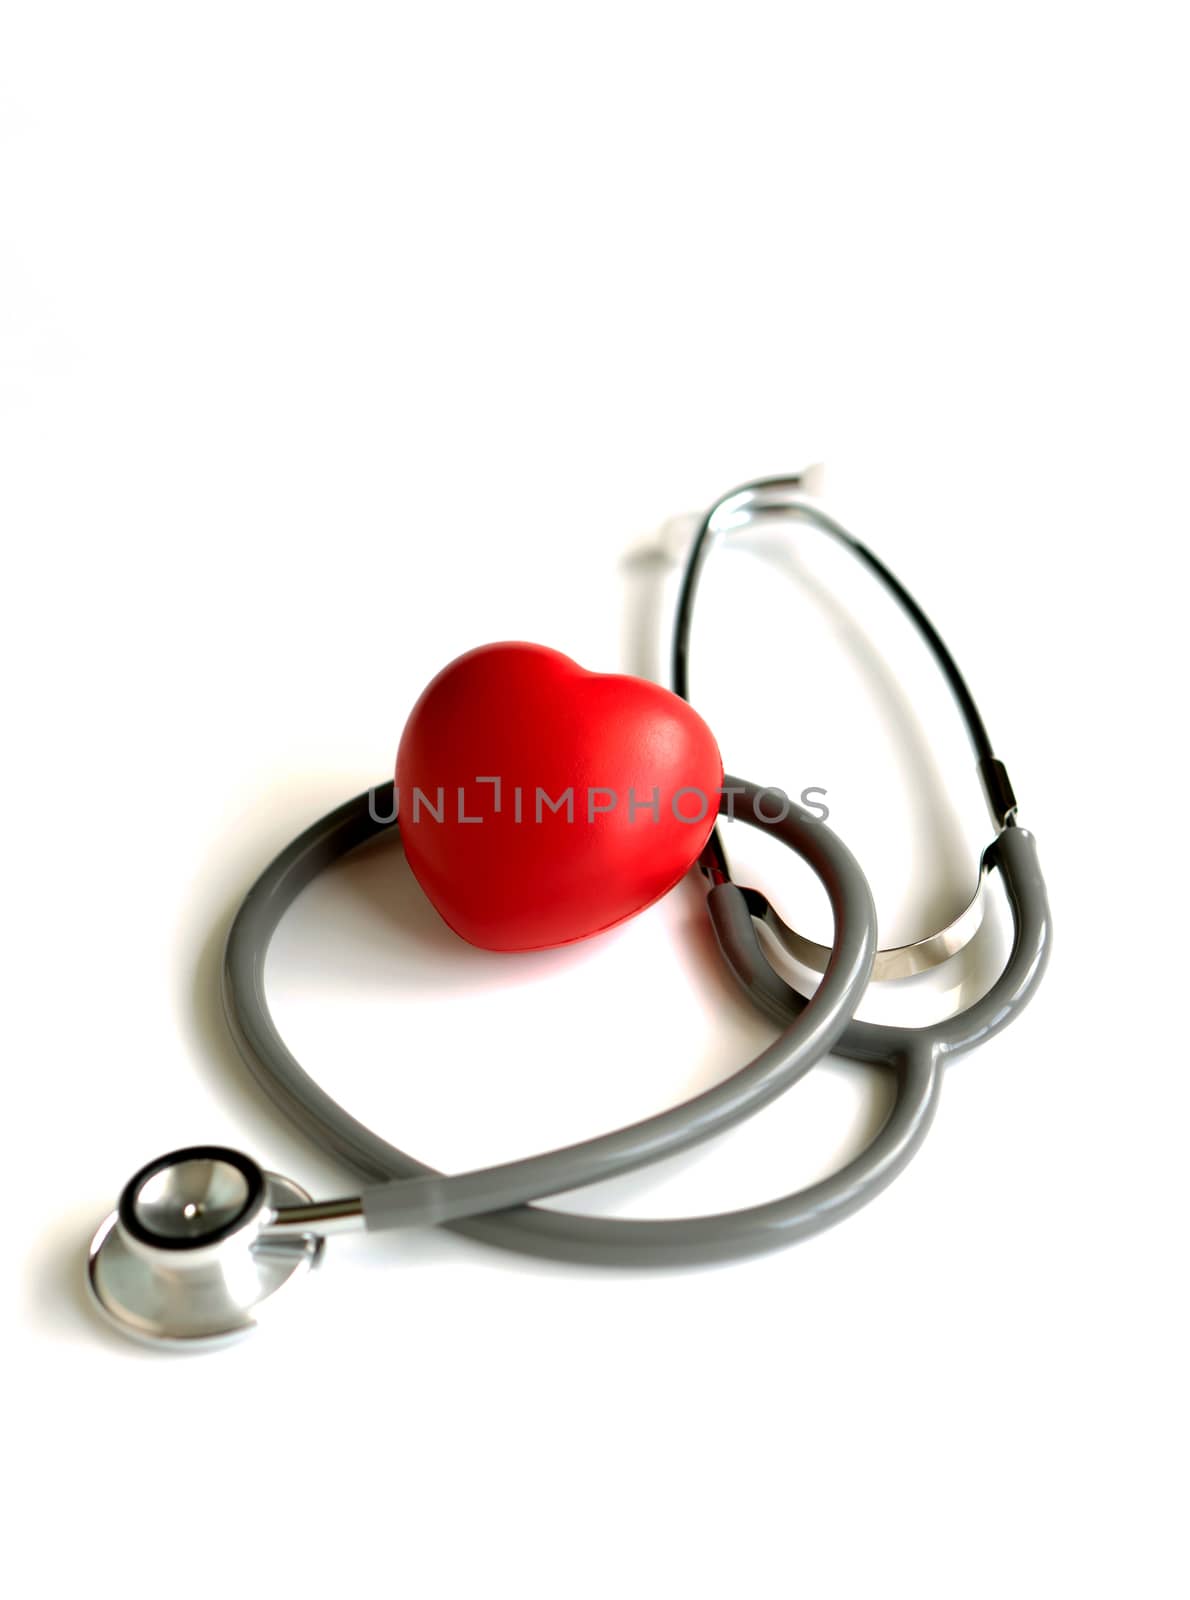 A heart with a stethoscope, isolated on white background